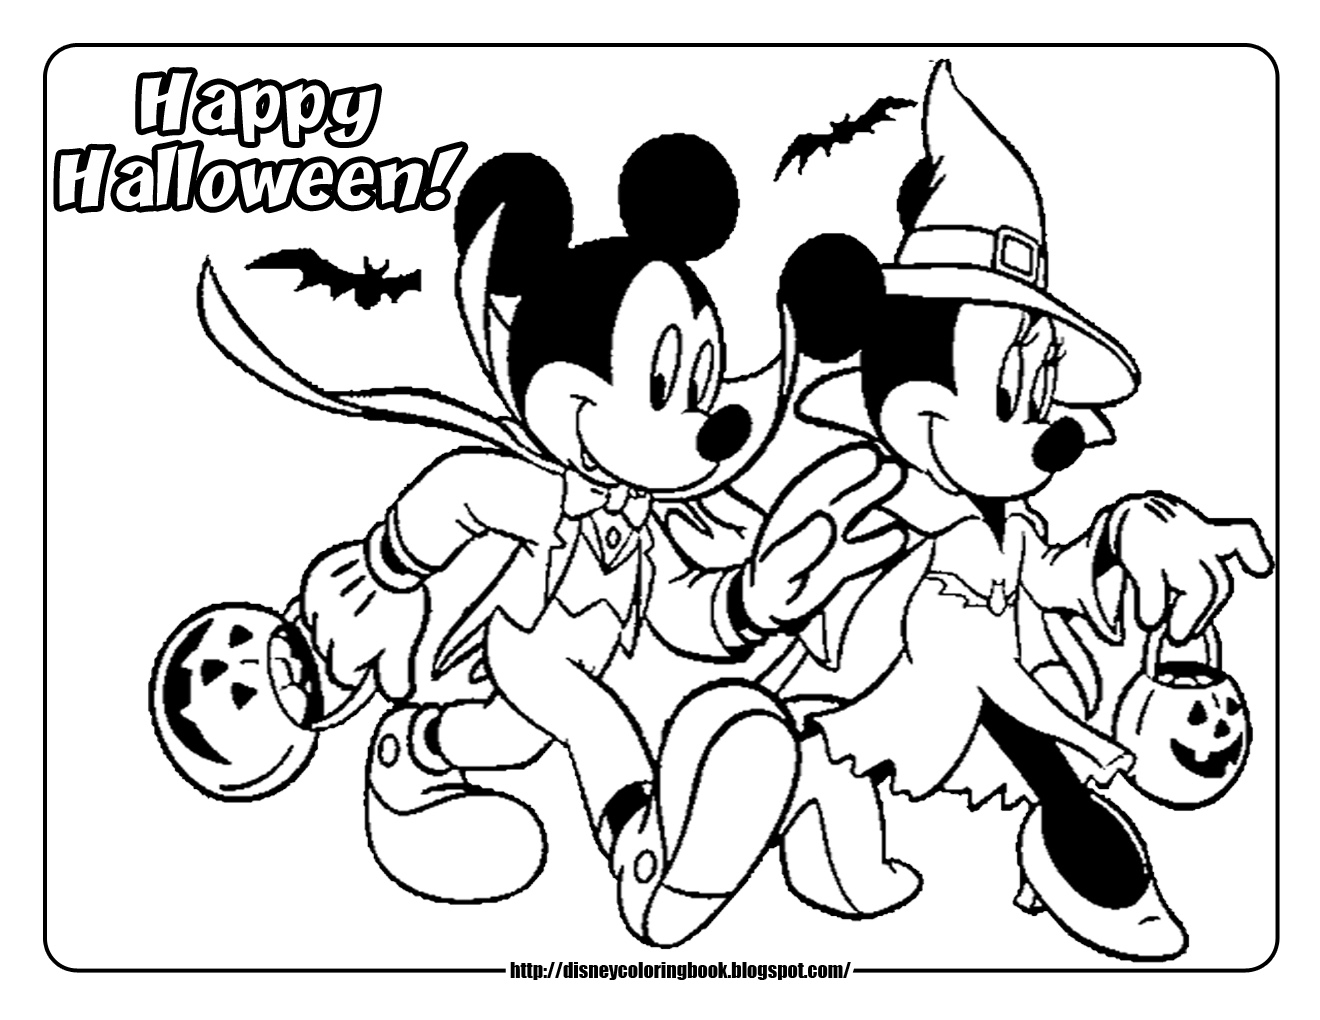 Mickey Mouse Halloween Costume Coloring Page